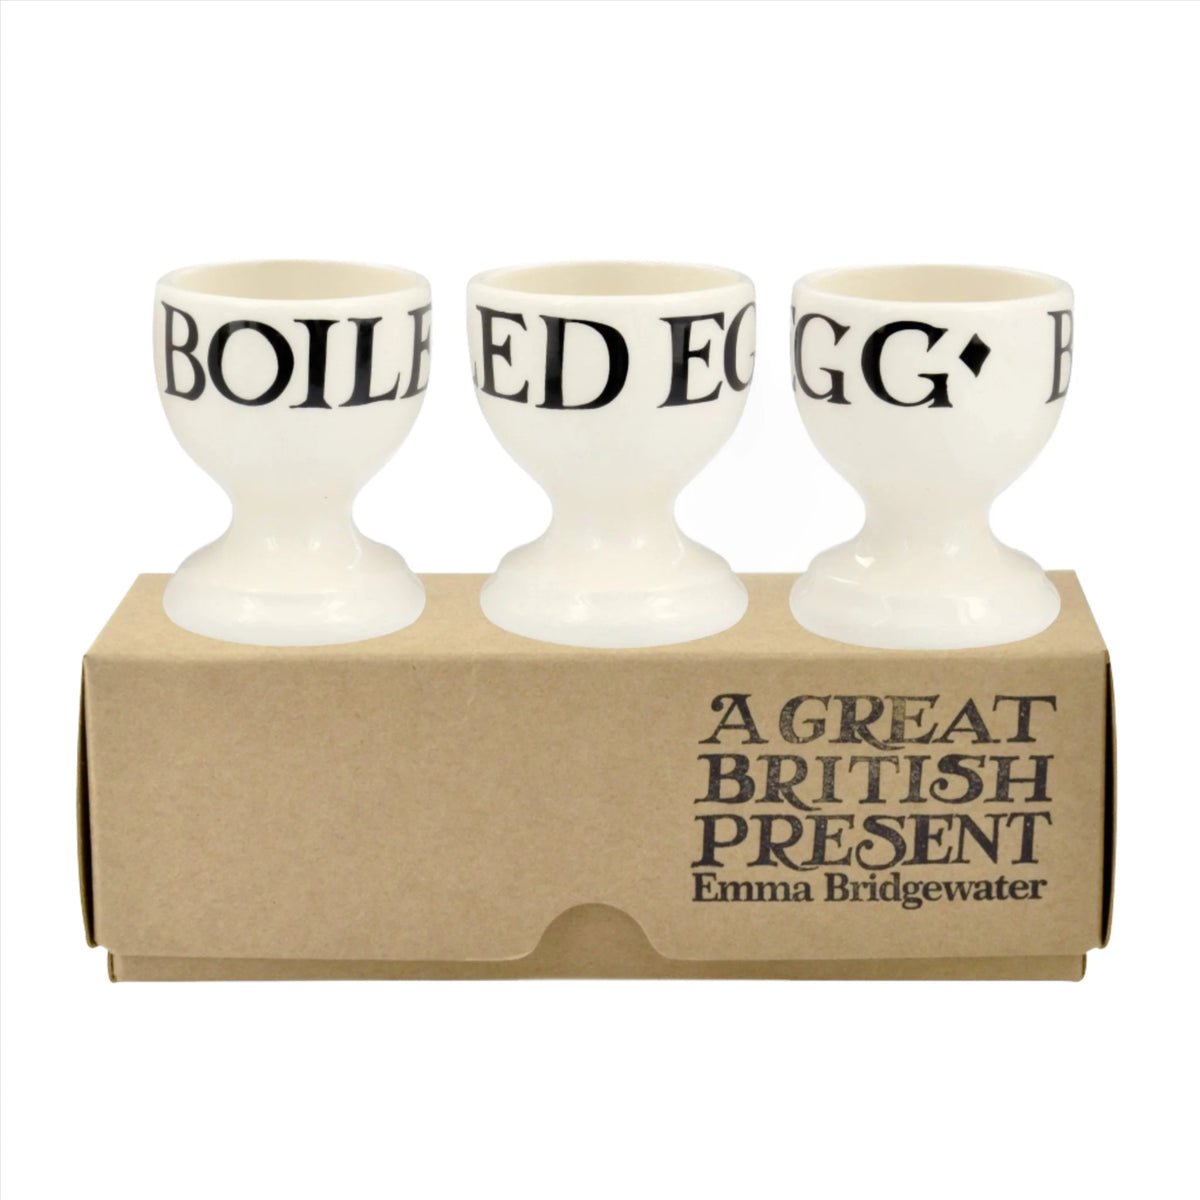 Black Toast Set of 3 Egg Cups Boxed